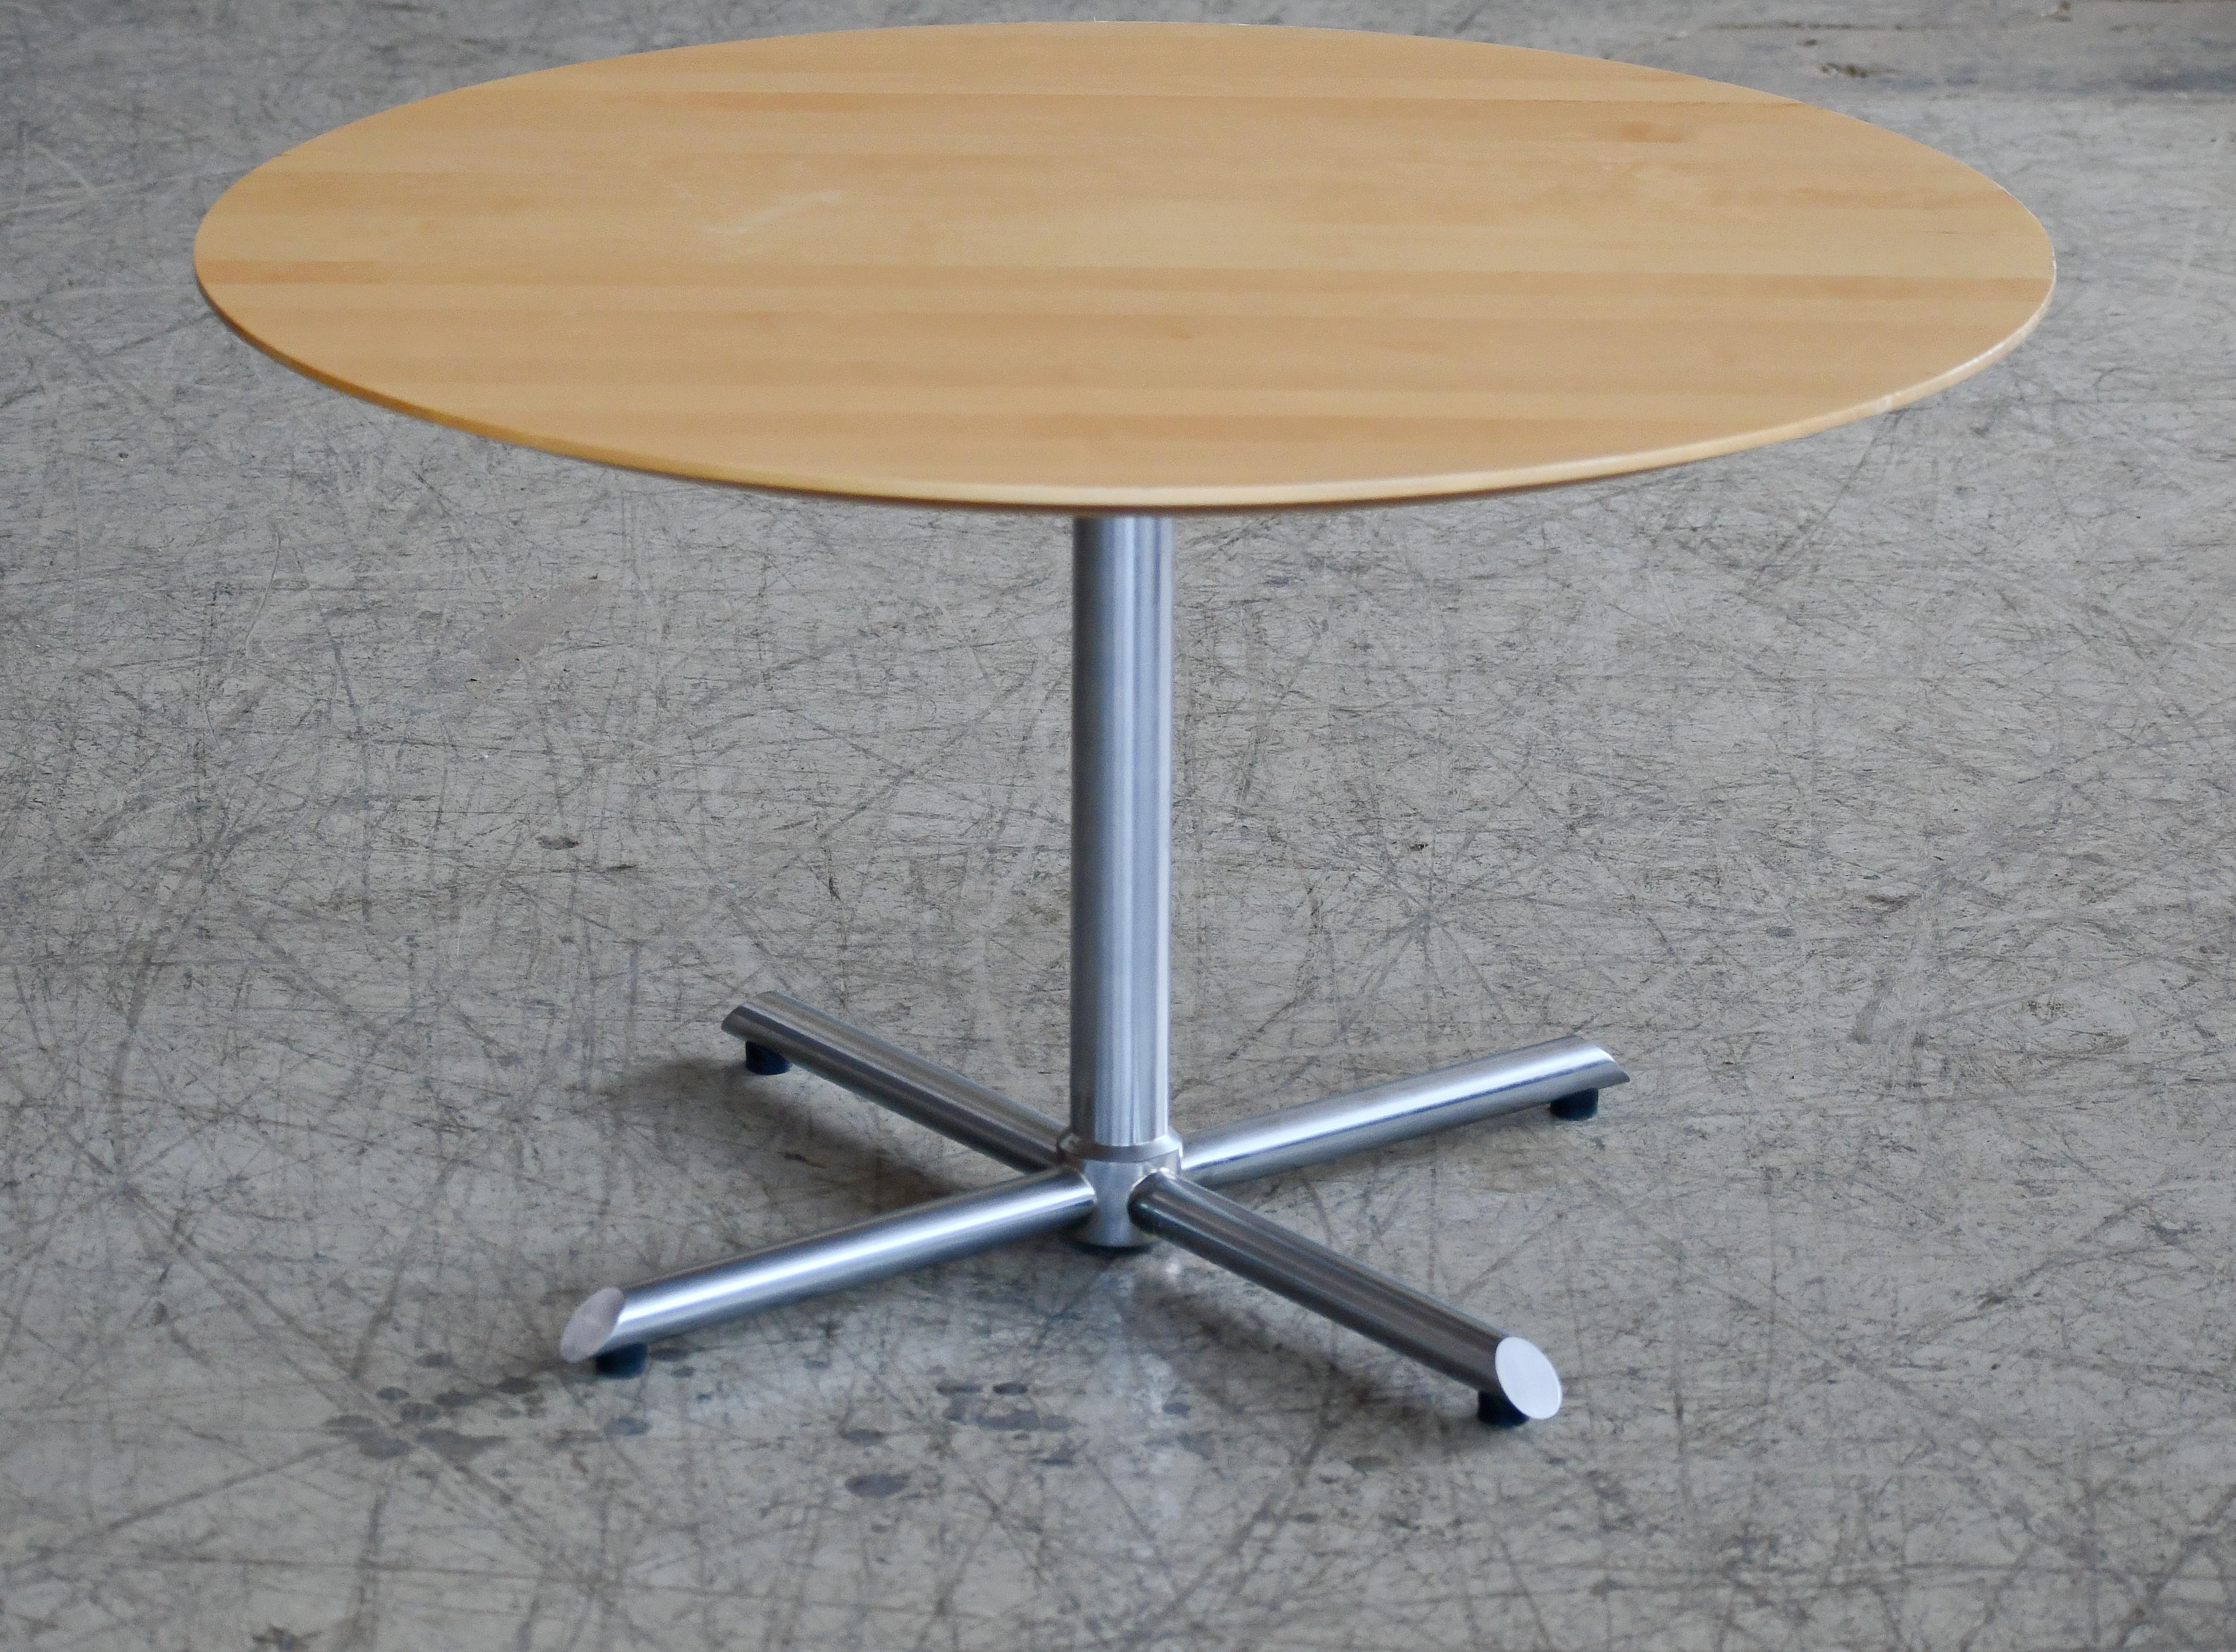 Scandinavian Modern Danish Modern Round Coffee or Cocktail Table in Maple and Steel by Fredericia V For Sale